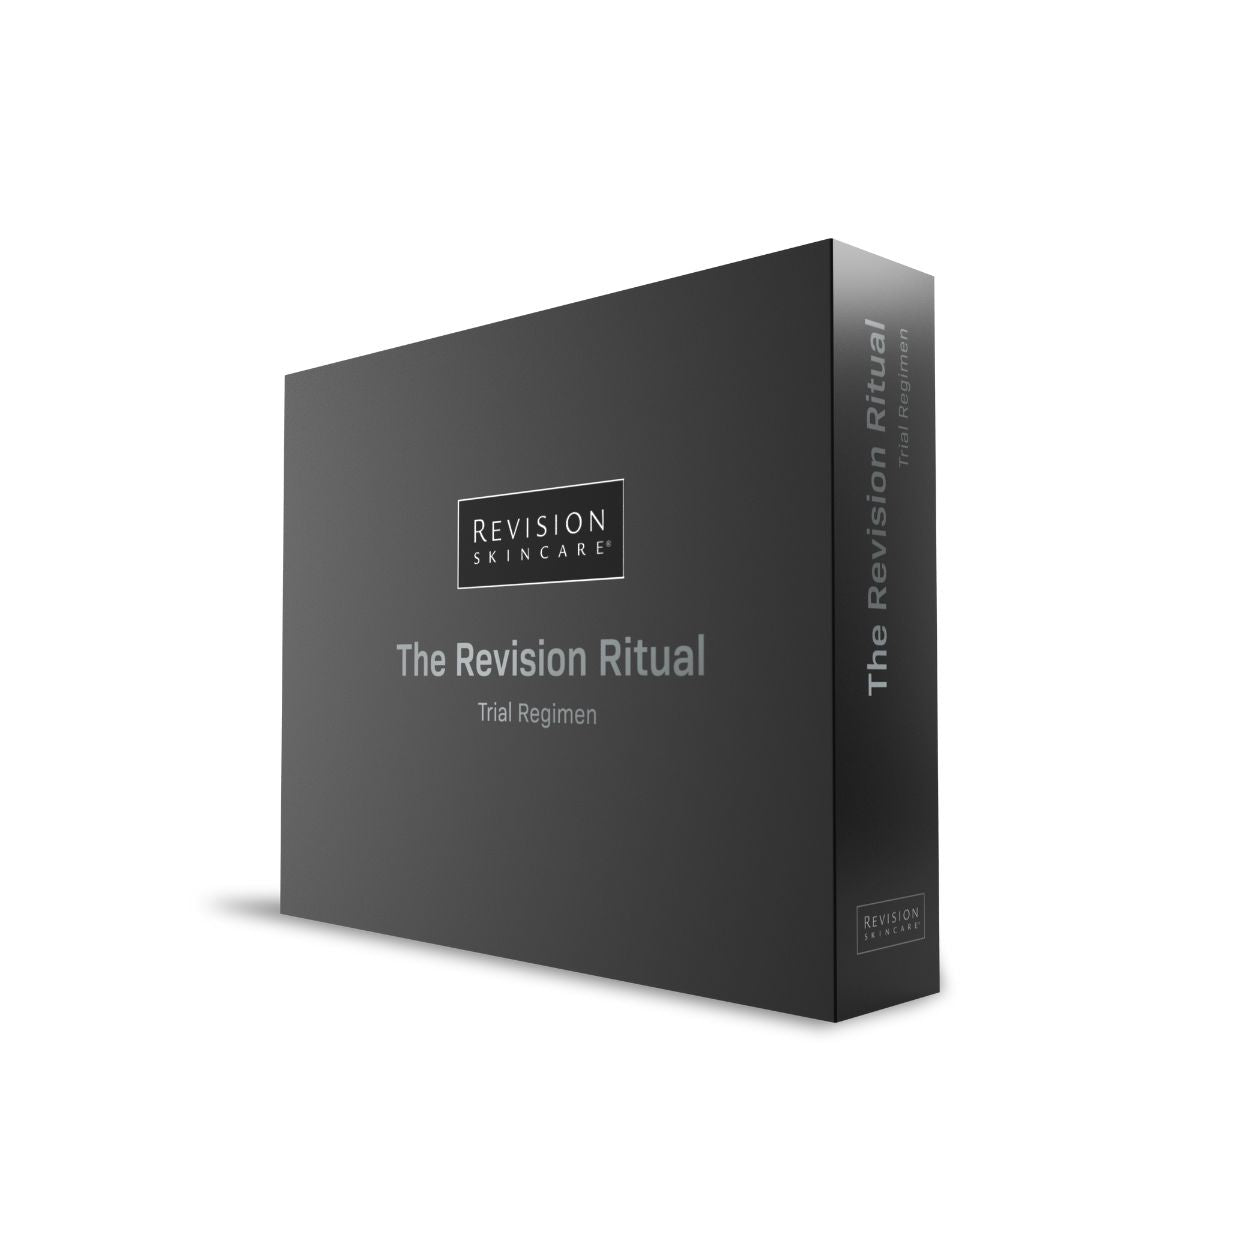 The Revision Ritual Limited Edition Trial Regimen